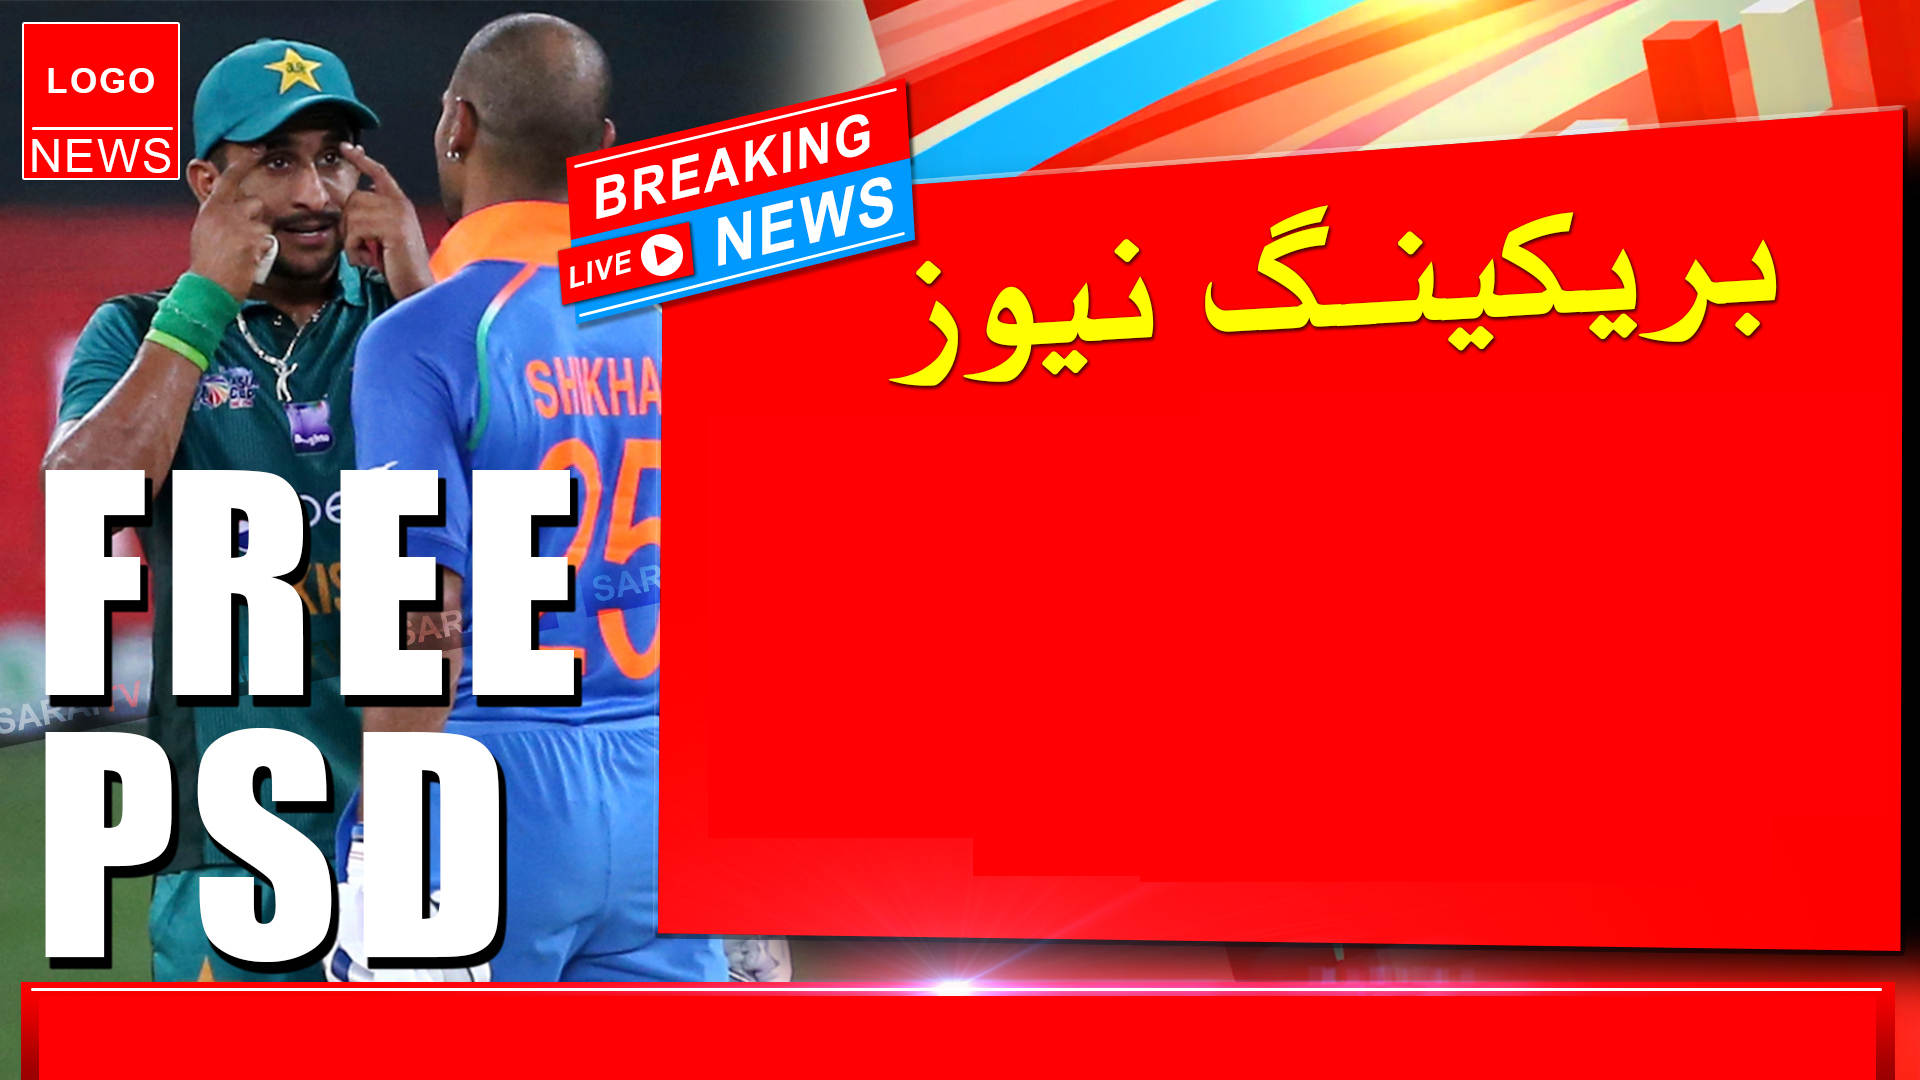 Breaking News Psd Photoshop Template Tv News Vectors Png And Psd Files Free Download Mtc Tutorials